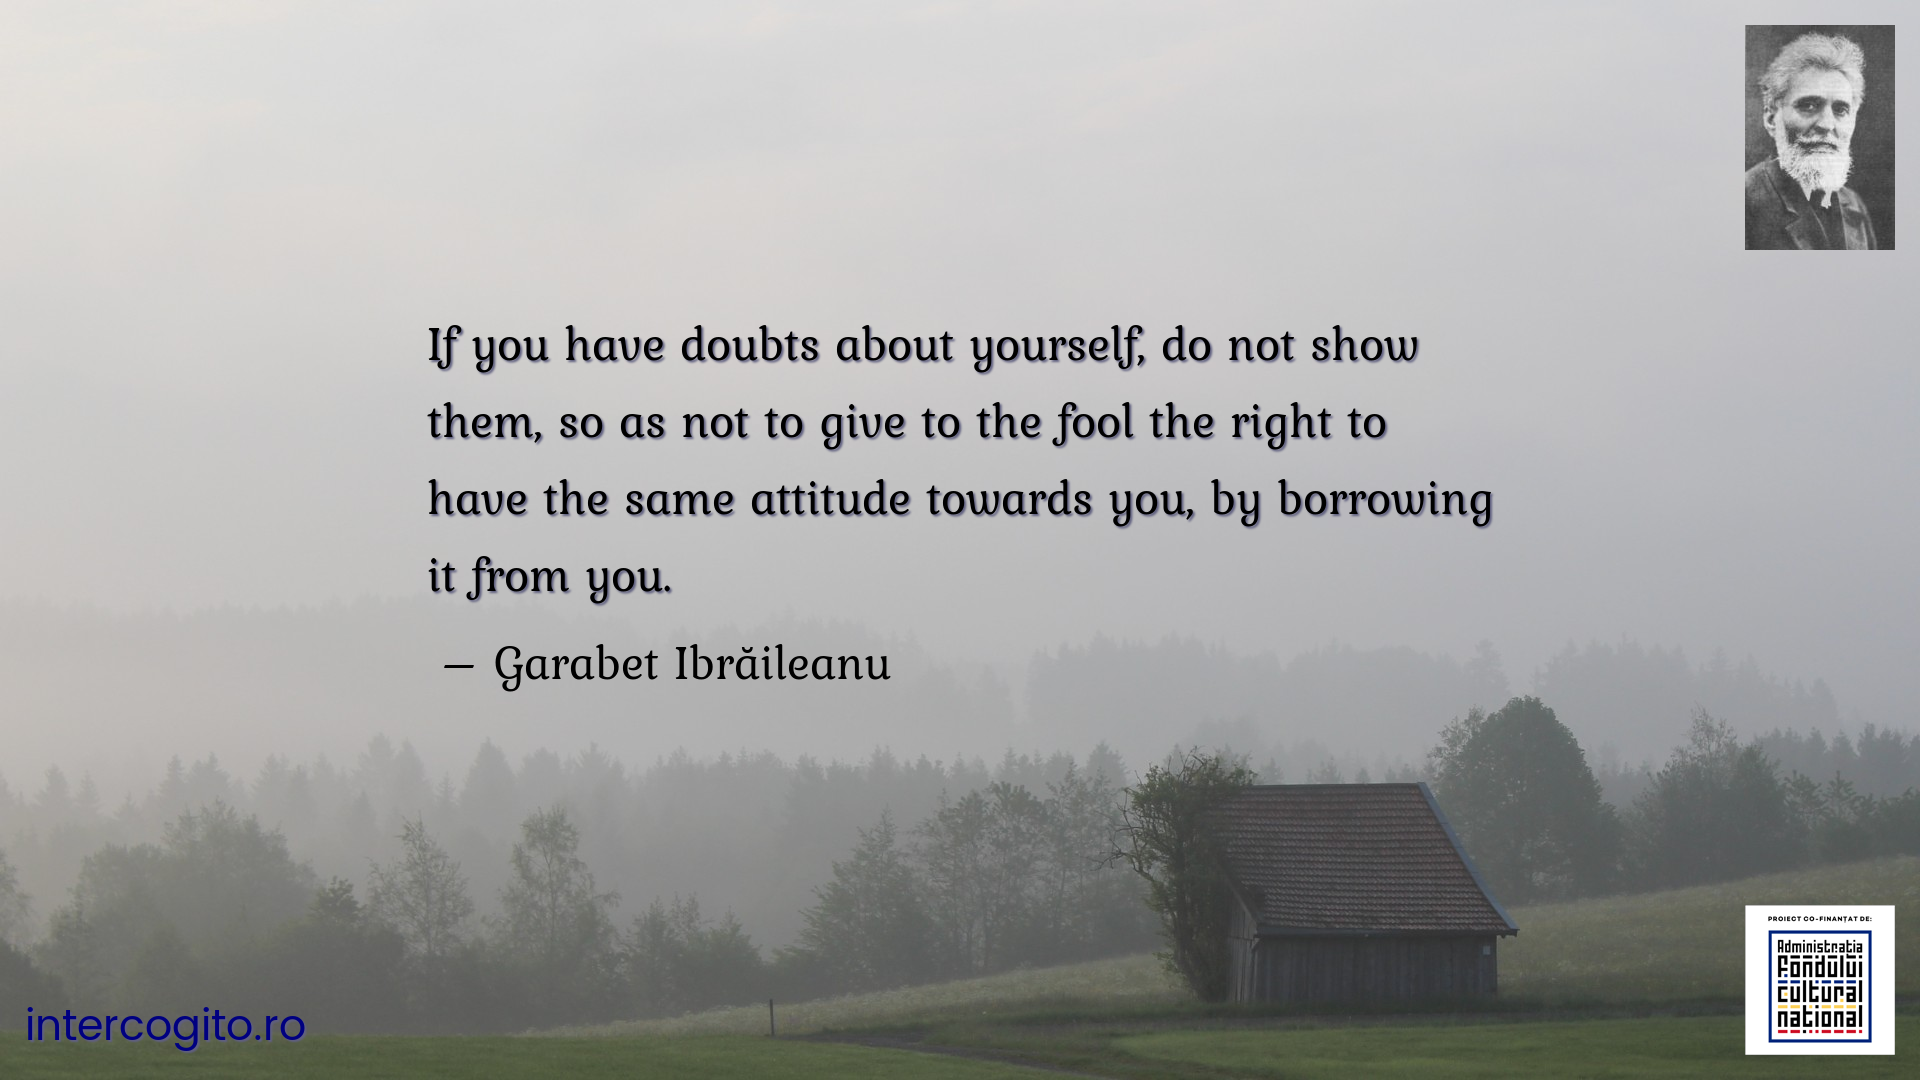 If you have doubts about yourself, do not show them, so as not to give to the fool the right to have the same attitude towards you, by borrowing it from you.